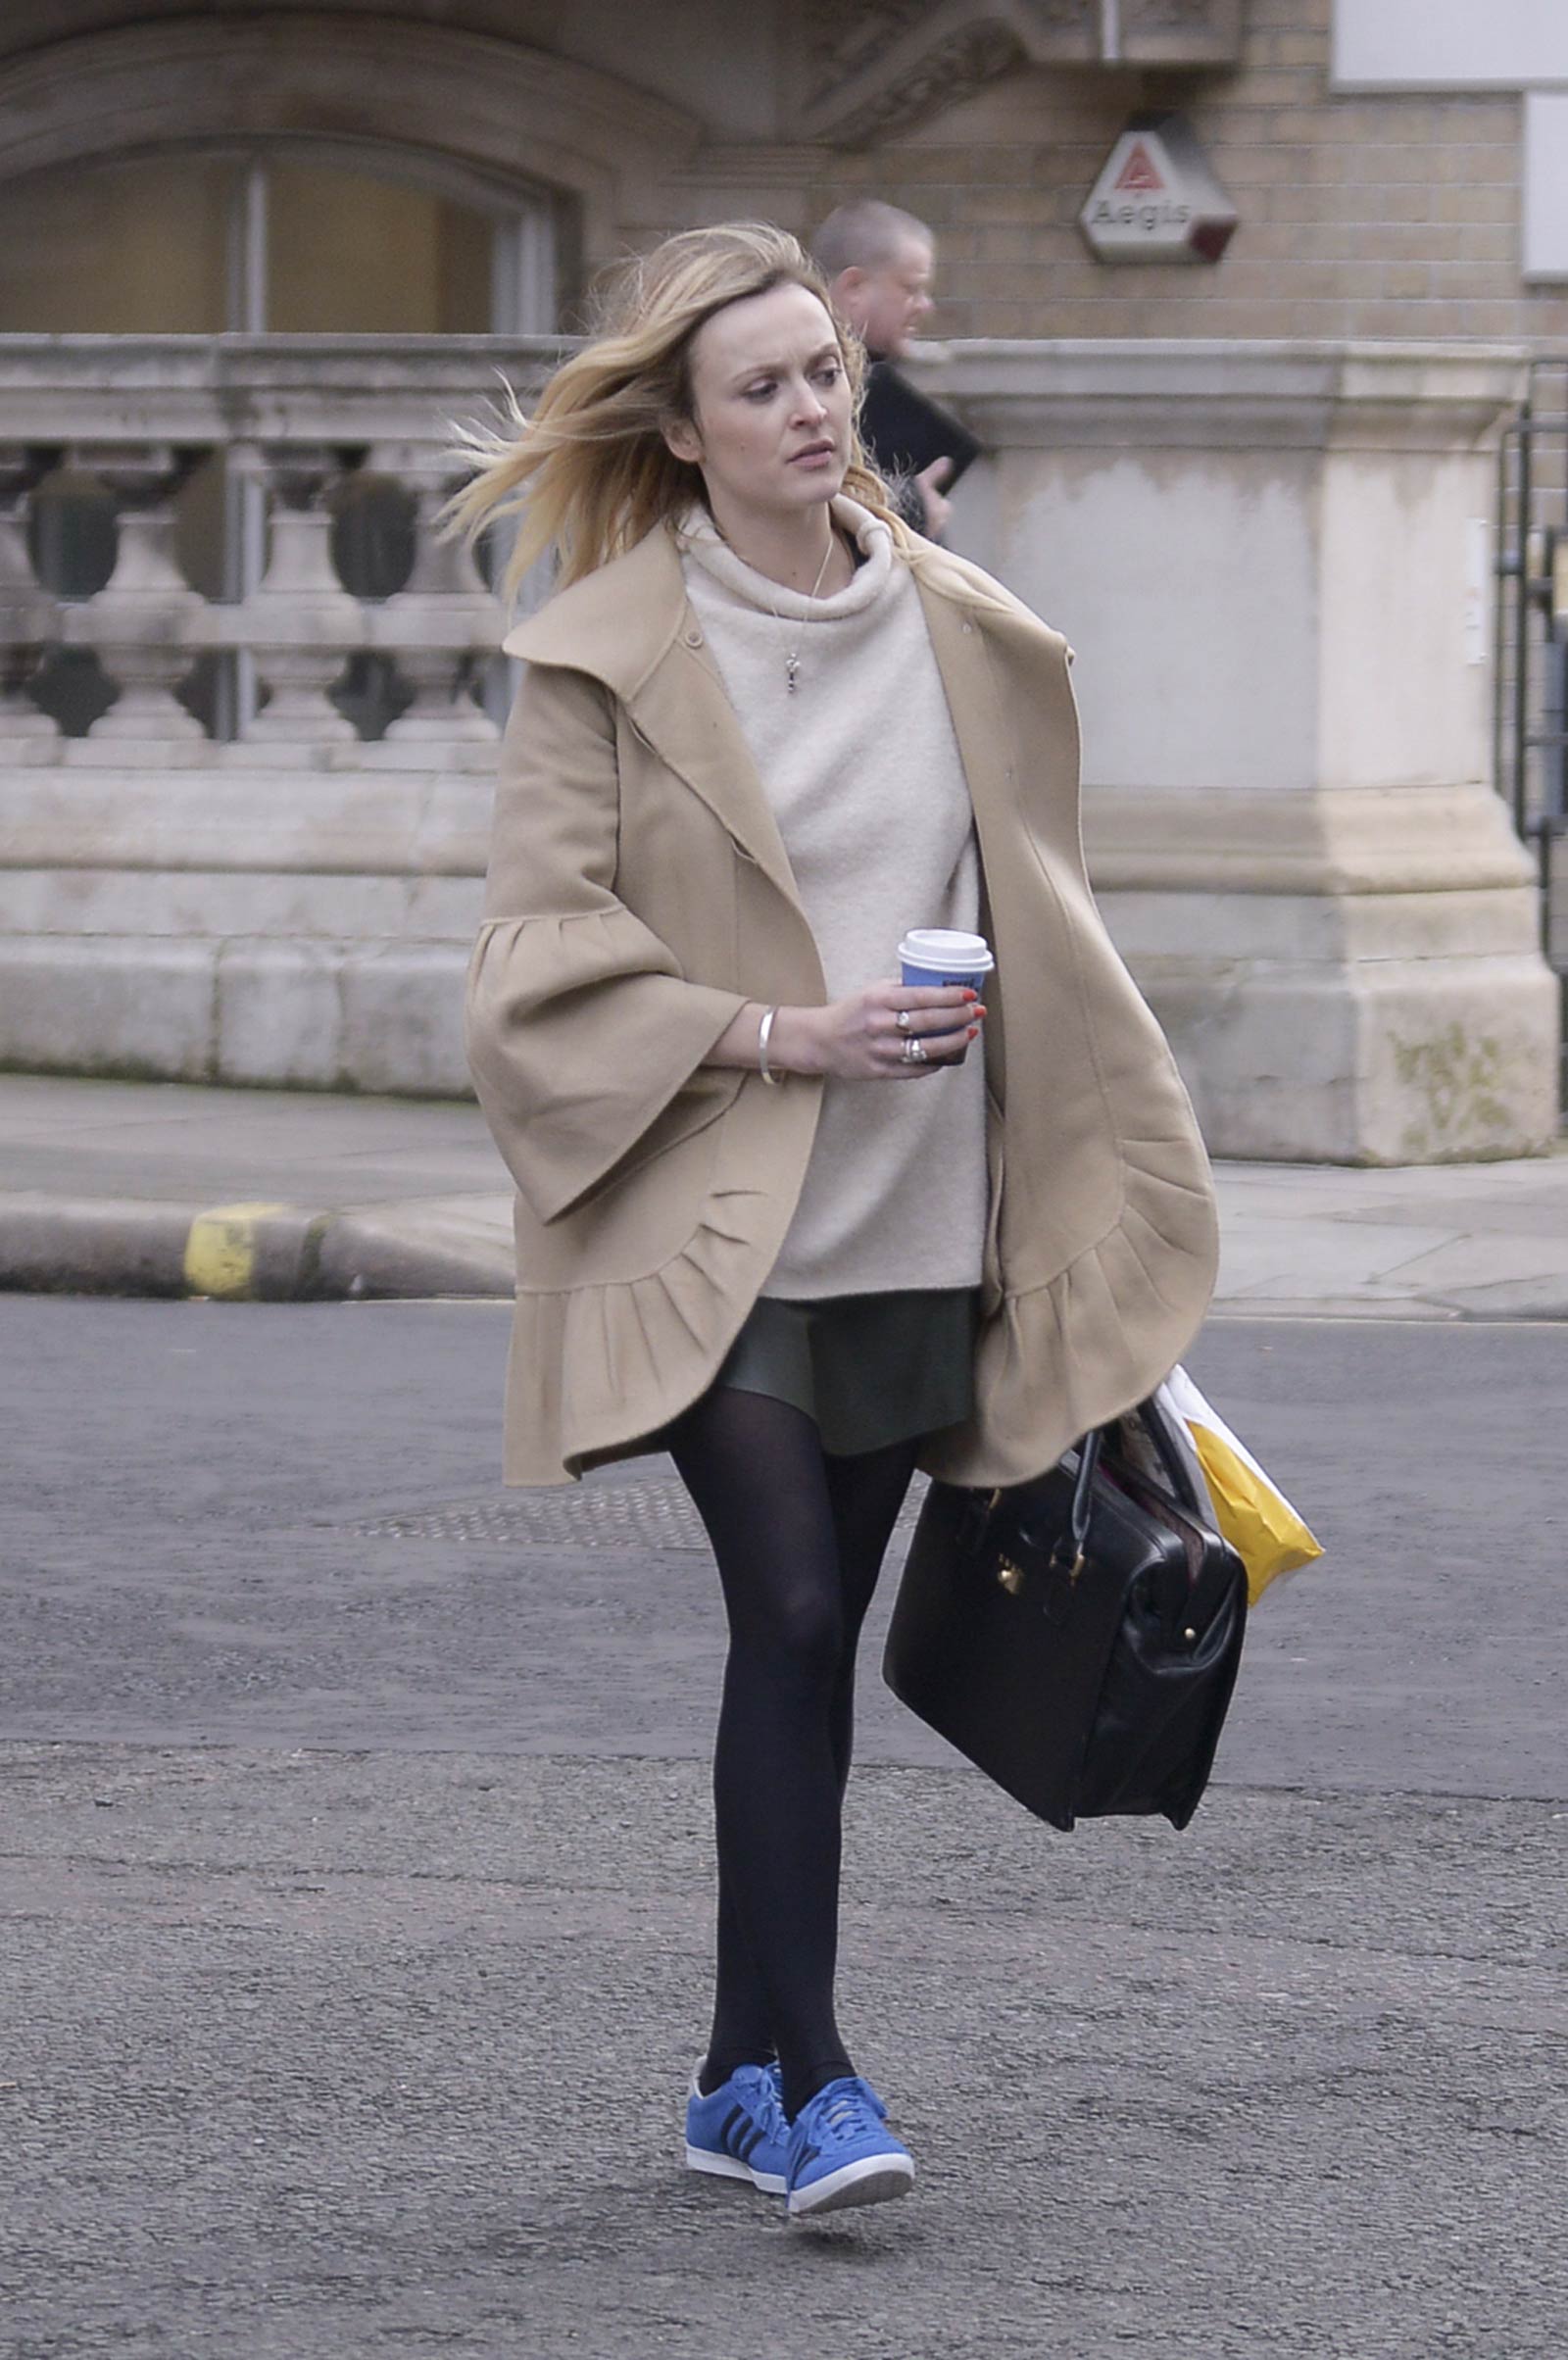 Fearne Cotton out and about in London